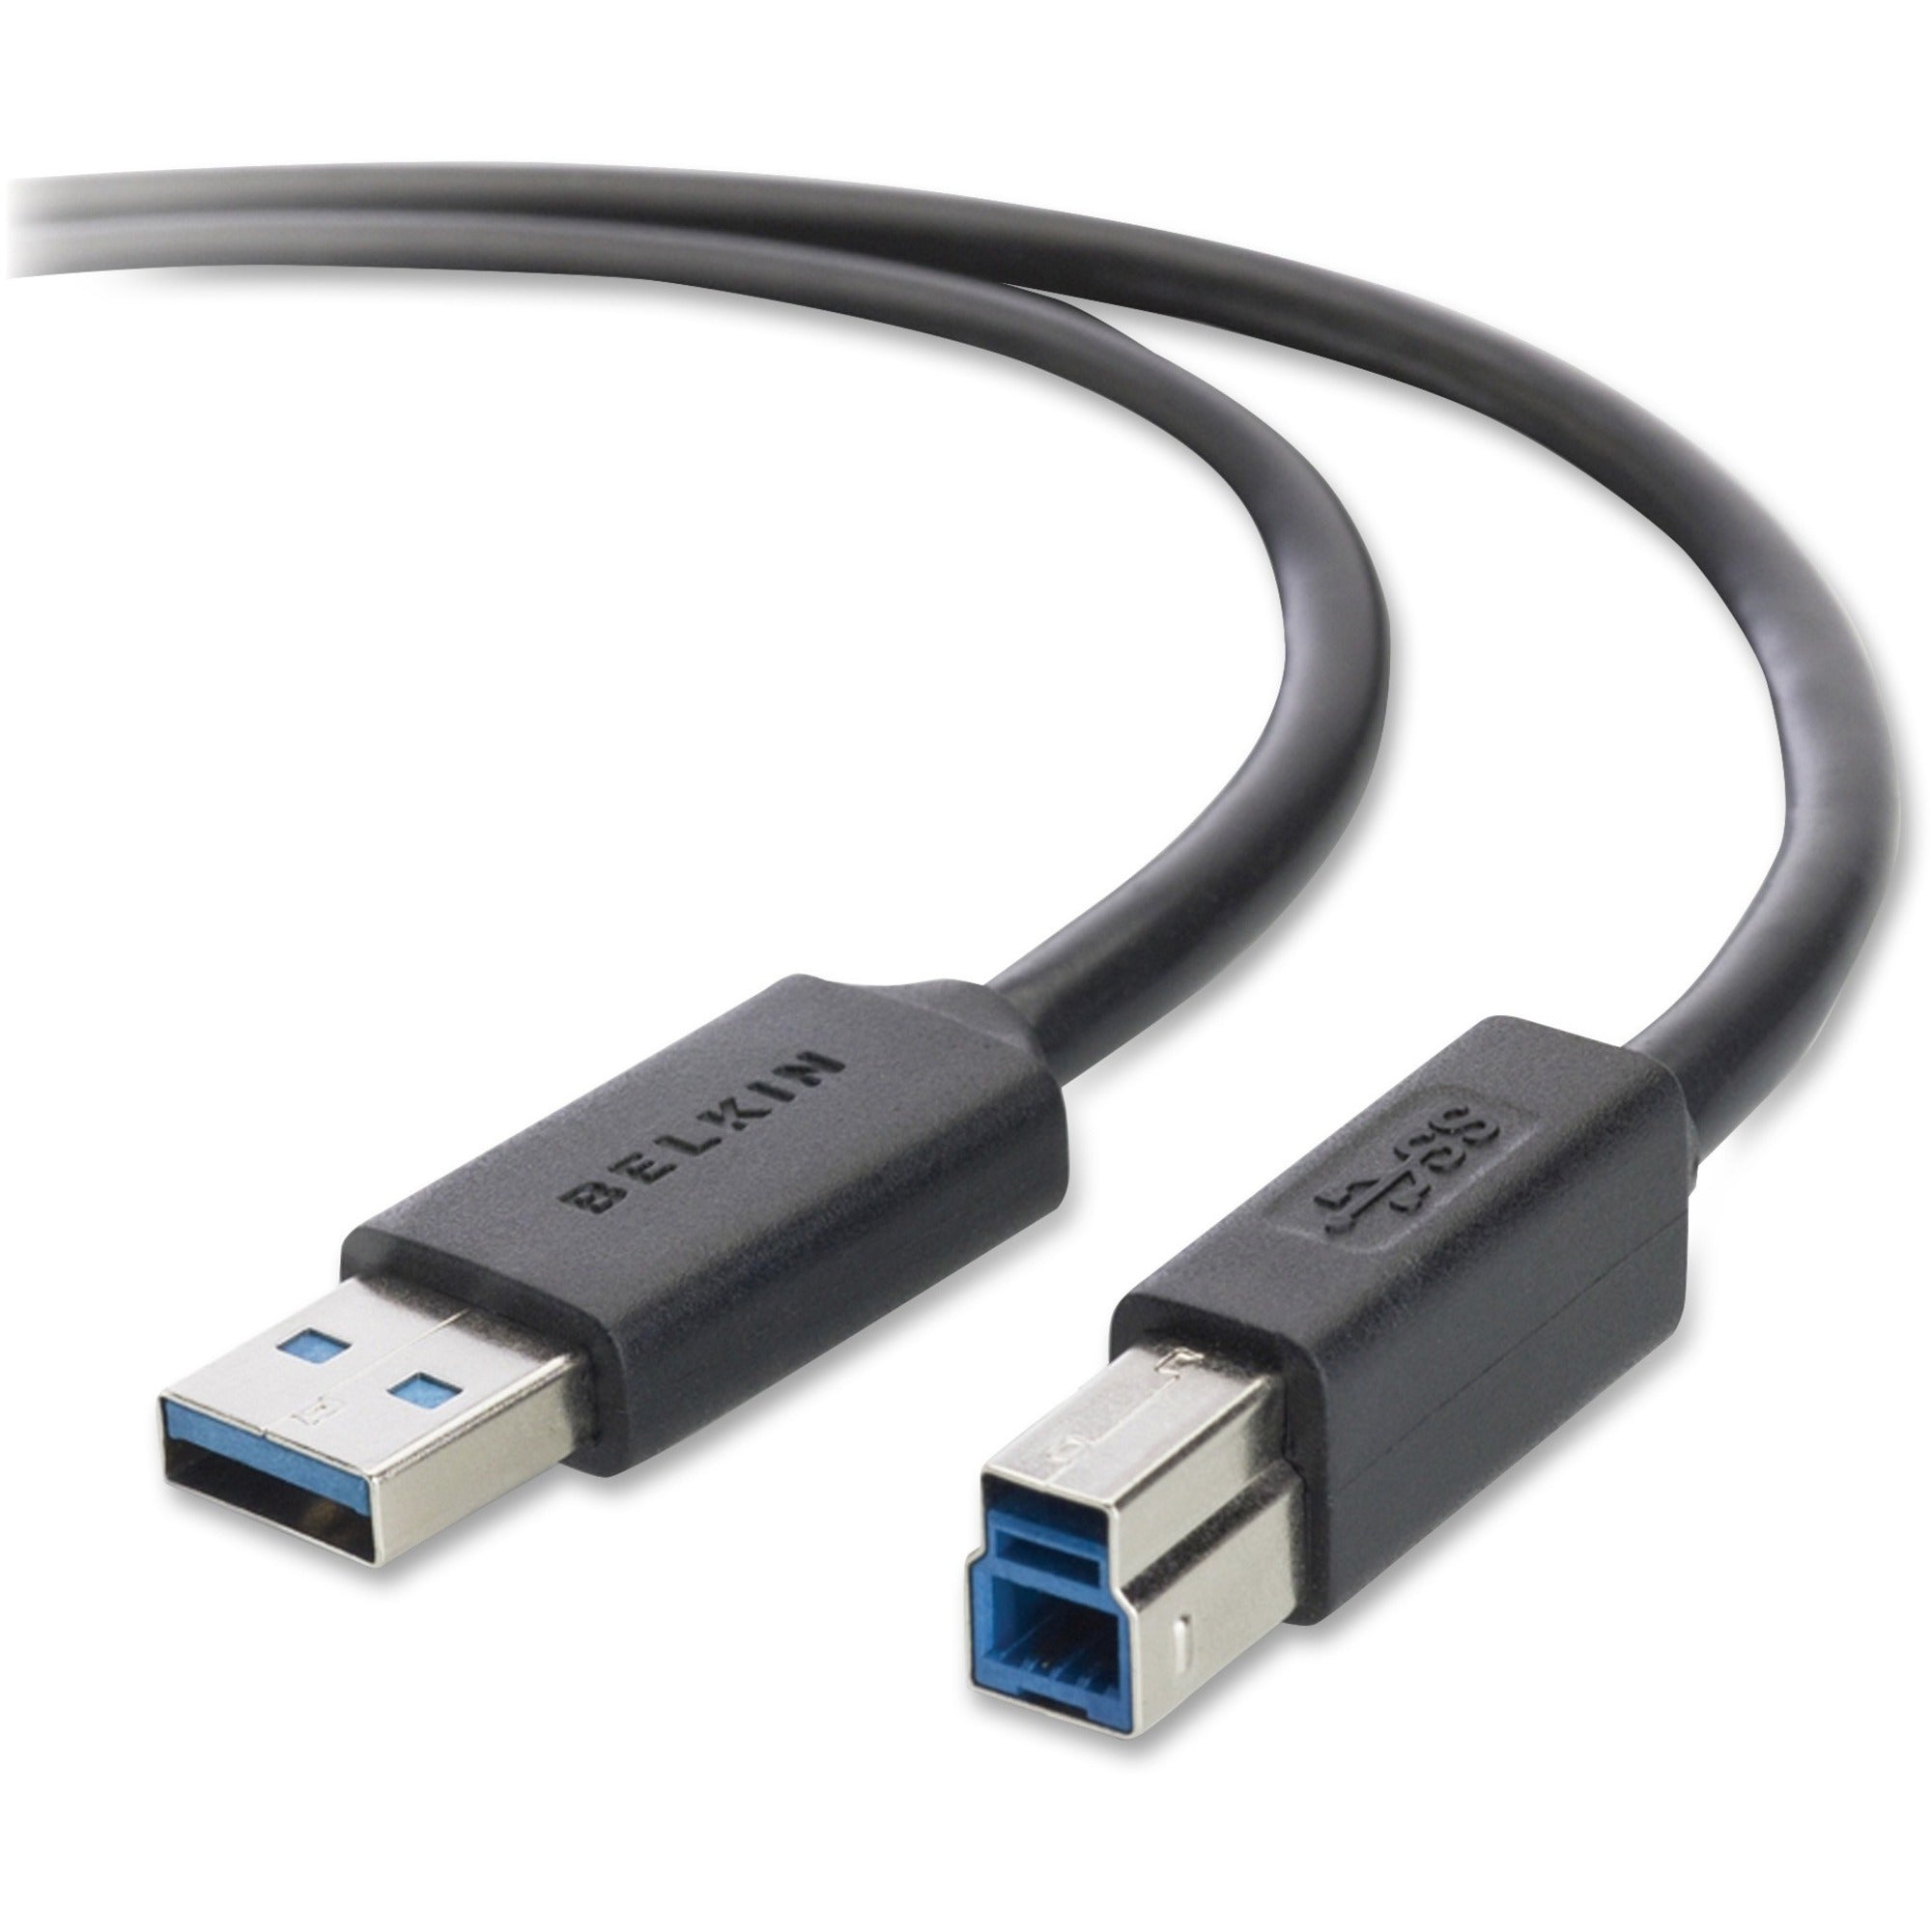 Belkin SuperSpeed USB 3.0 Cable - 10 ft USB Data Transfer Cable for Printer, Scanner, Portable Hard Drive, Keyboard - First End: 1 x 9-pin USB 3.0 Type A - Male - Second End: 1 x 9-pin USB 3.0 Type B - Male - Shielding - Black - 1 Each - 